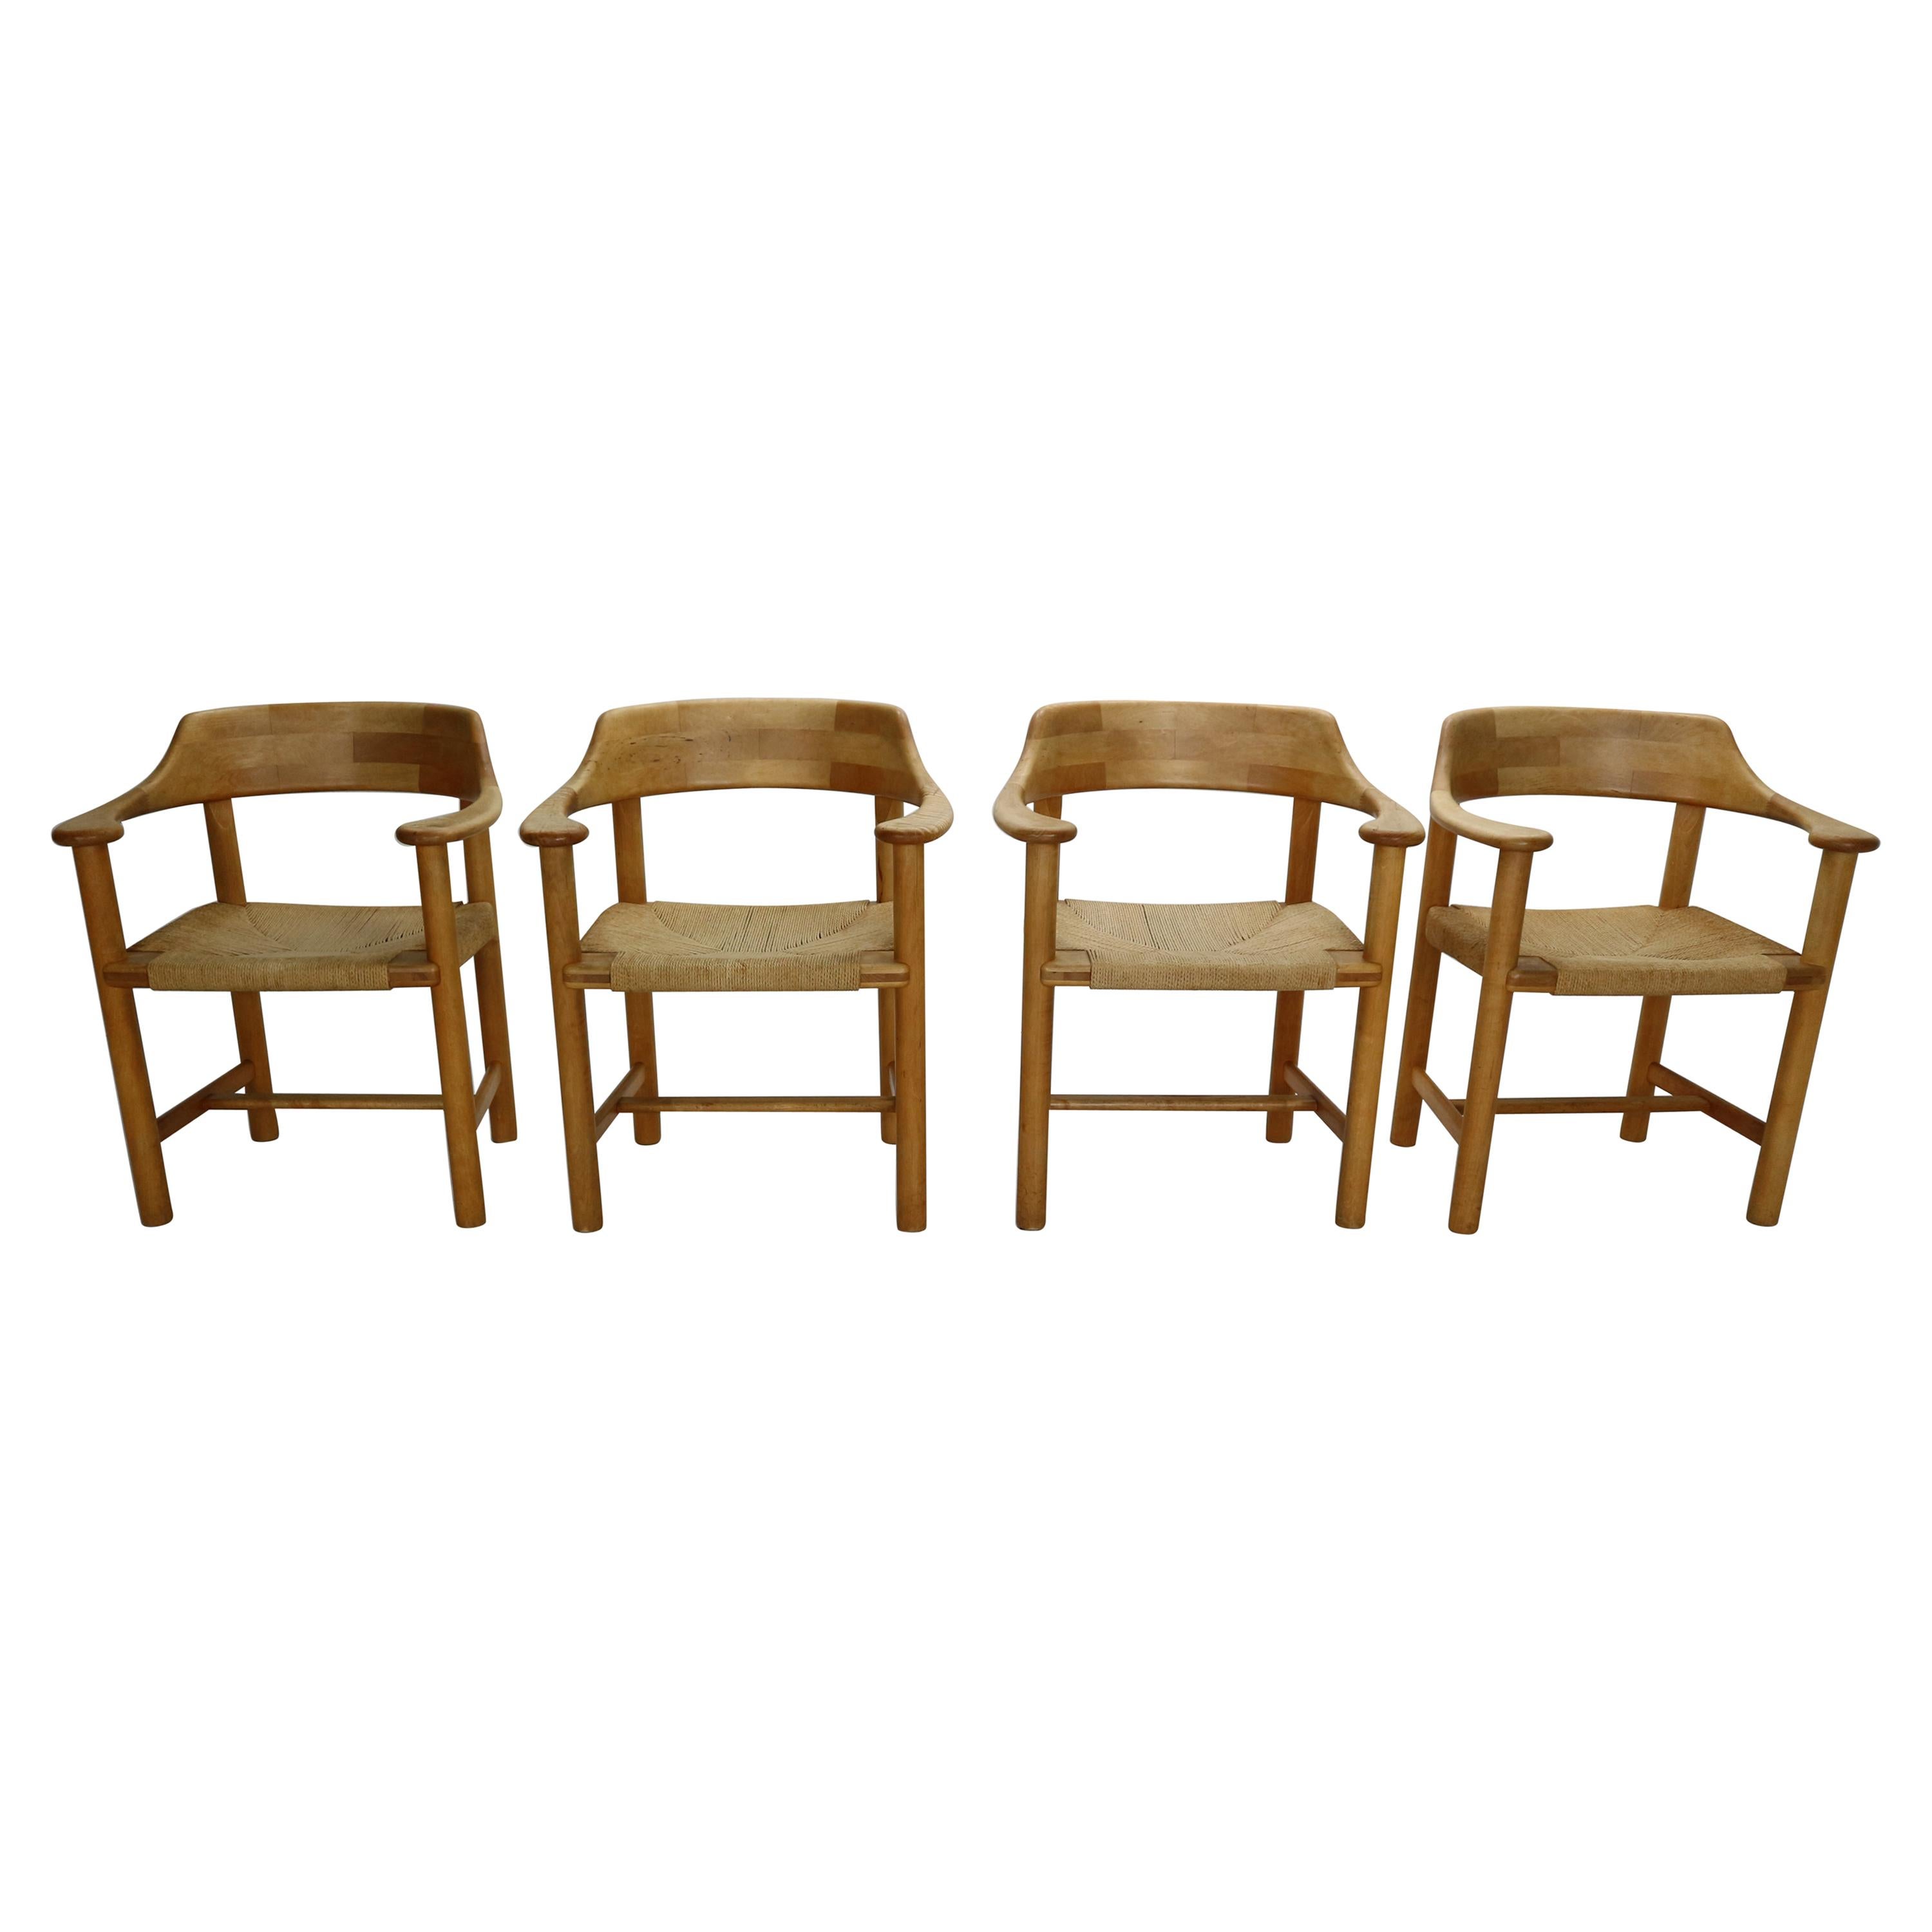 Rainer Daumiller for Hirtshals Sawmill Set of 4 Dining Room Chairs, Denmark 1970